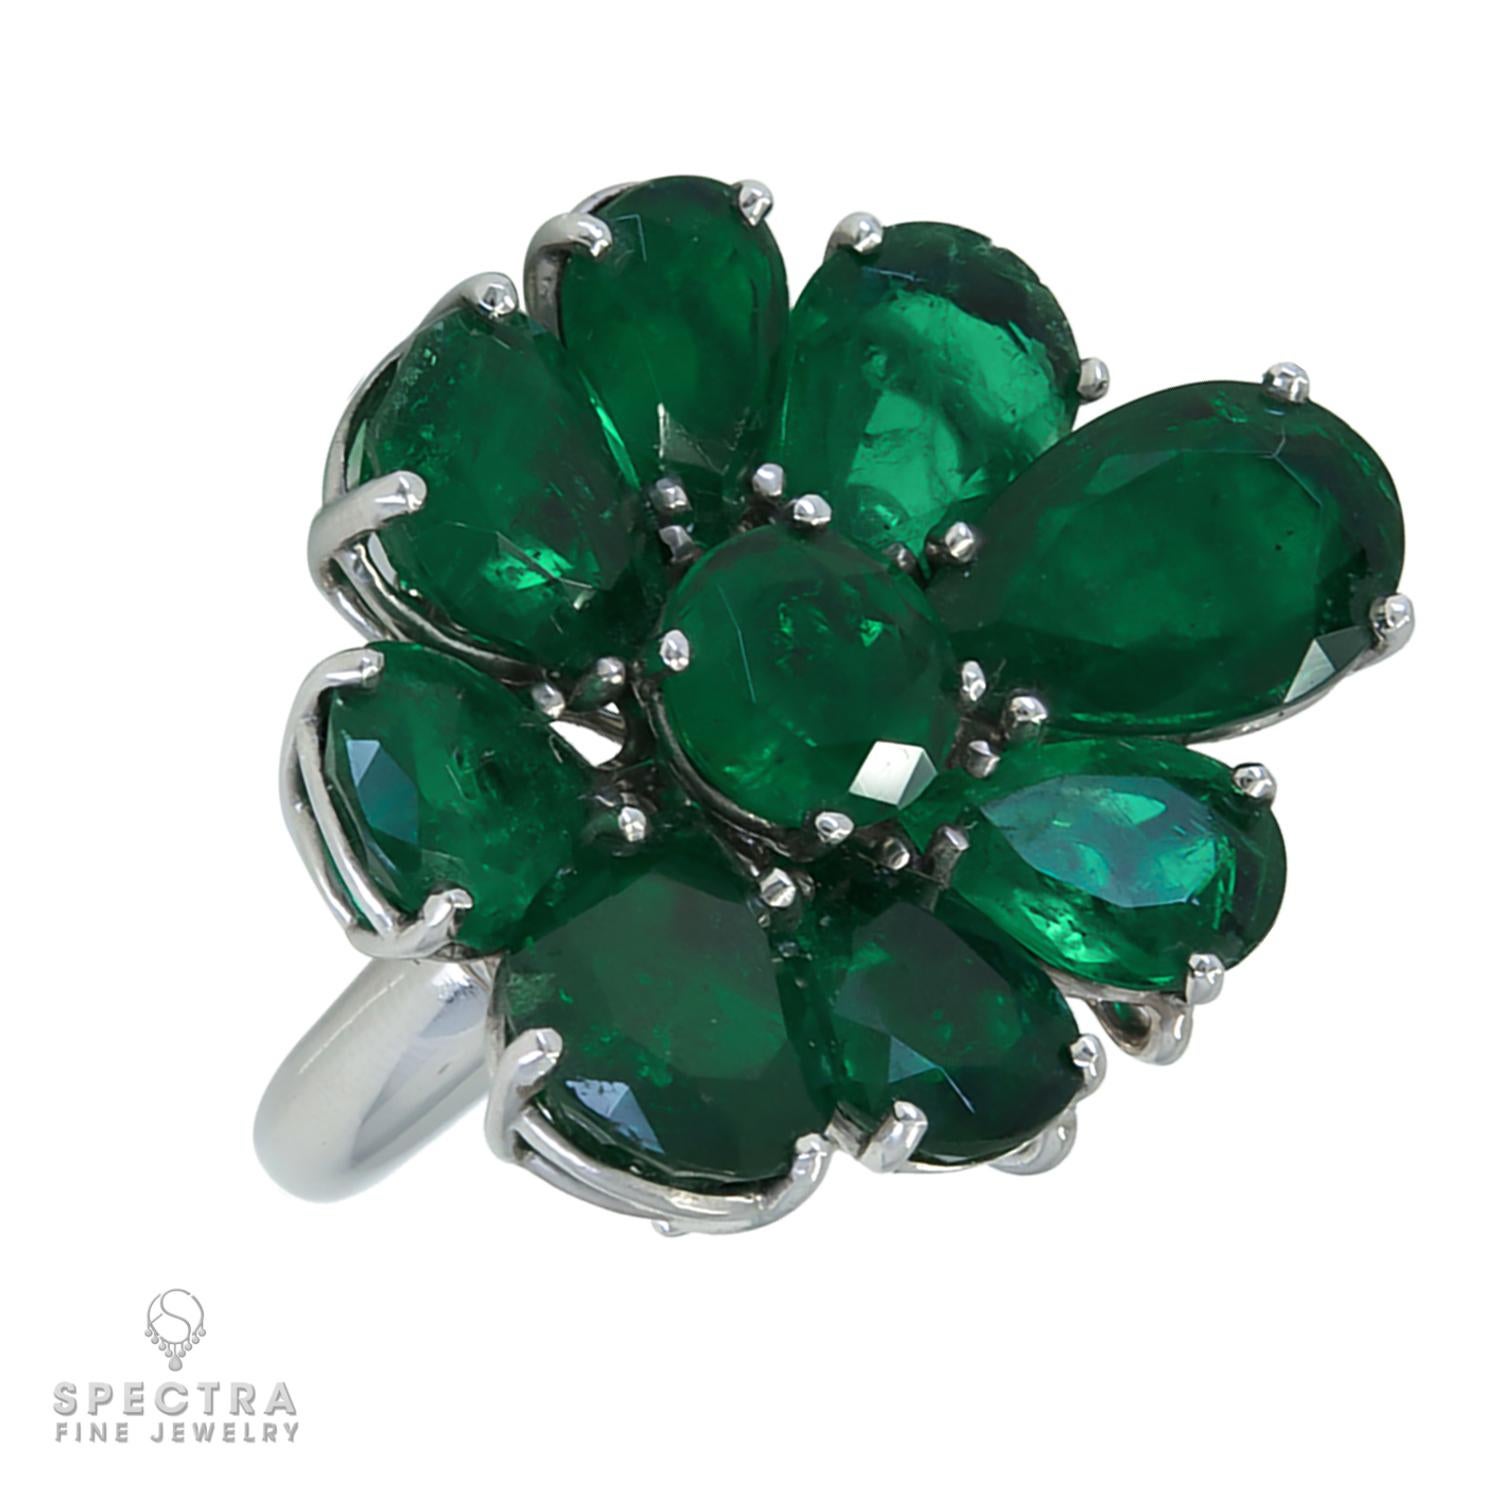 This Spectra Fine Jewelry Colombian Emerald Convertible Flower Ring and Pendant, made in the Contemporary Era, circa 2010s, features 9 Colombian emeralds including 8 pear-shape and 1 round, weighing approximately 17.32 carats total. The eight petals